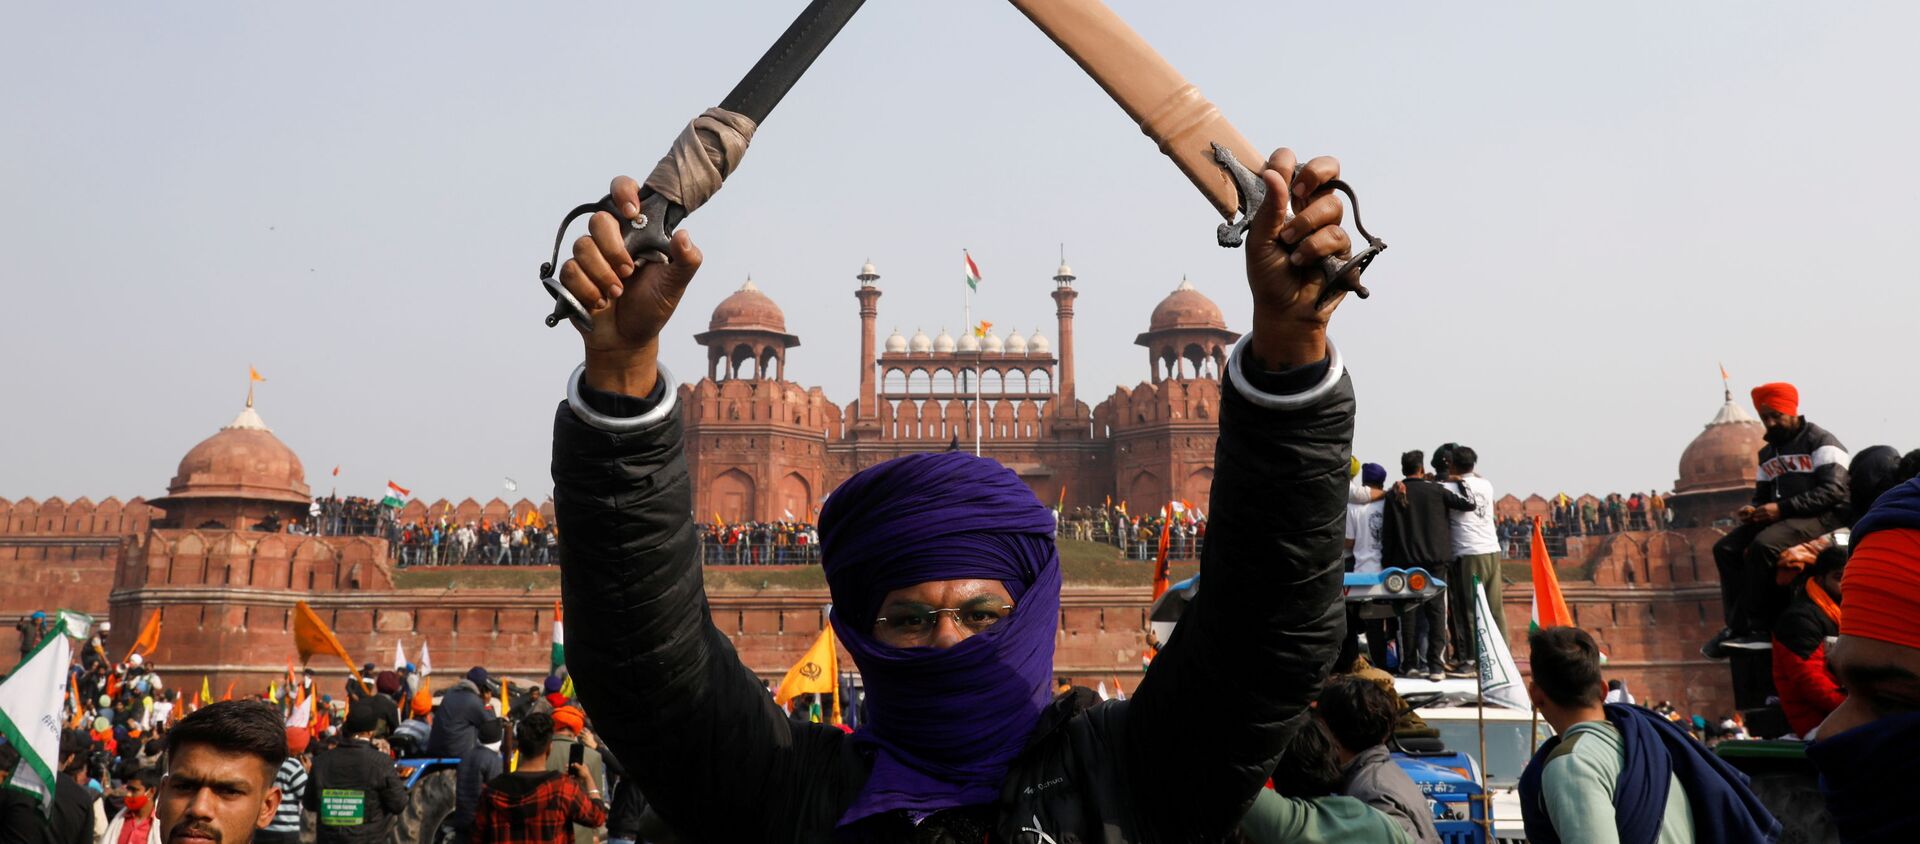 A farmer holds a sword aloft during a protest against farm laws introduced by the government, at the historic Red Fort in Delhi, India, 26 January 2021. - Sputnik International, 1920, 05.02.2021